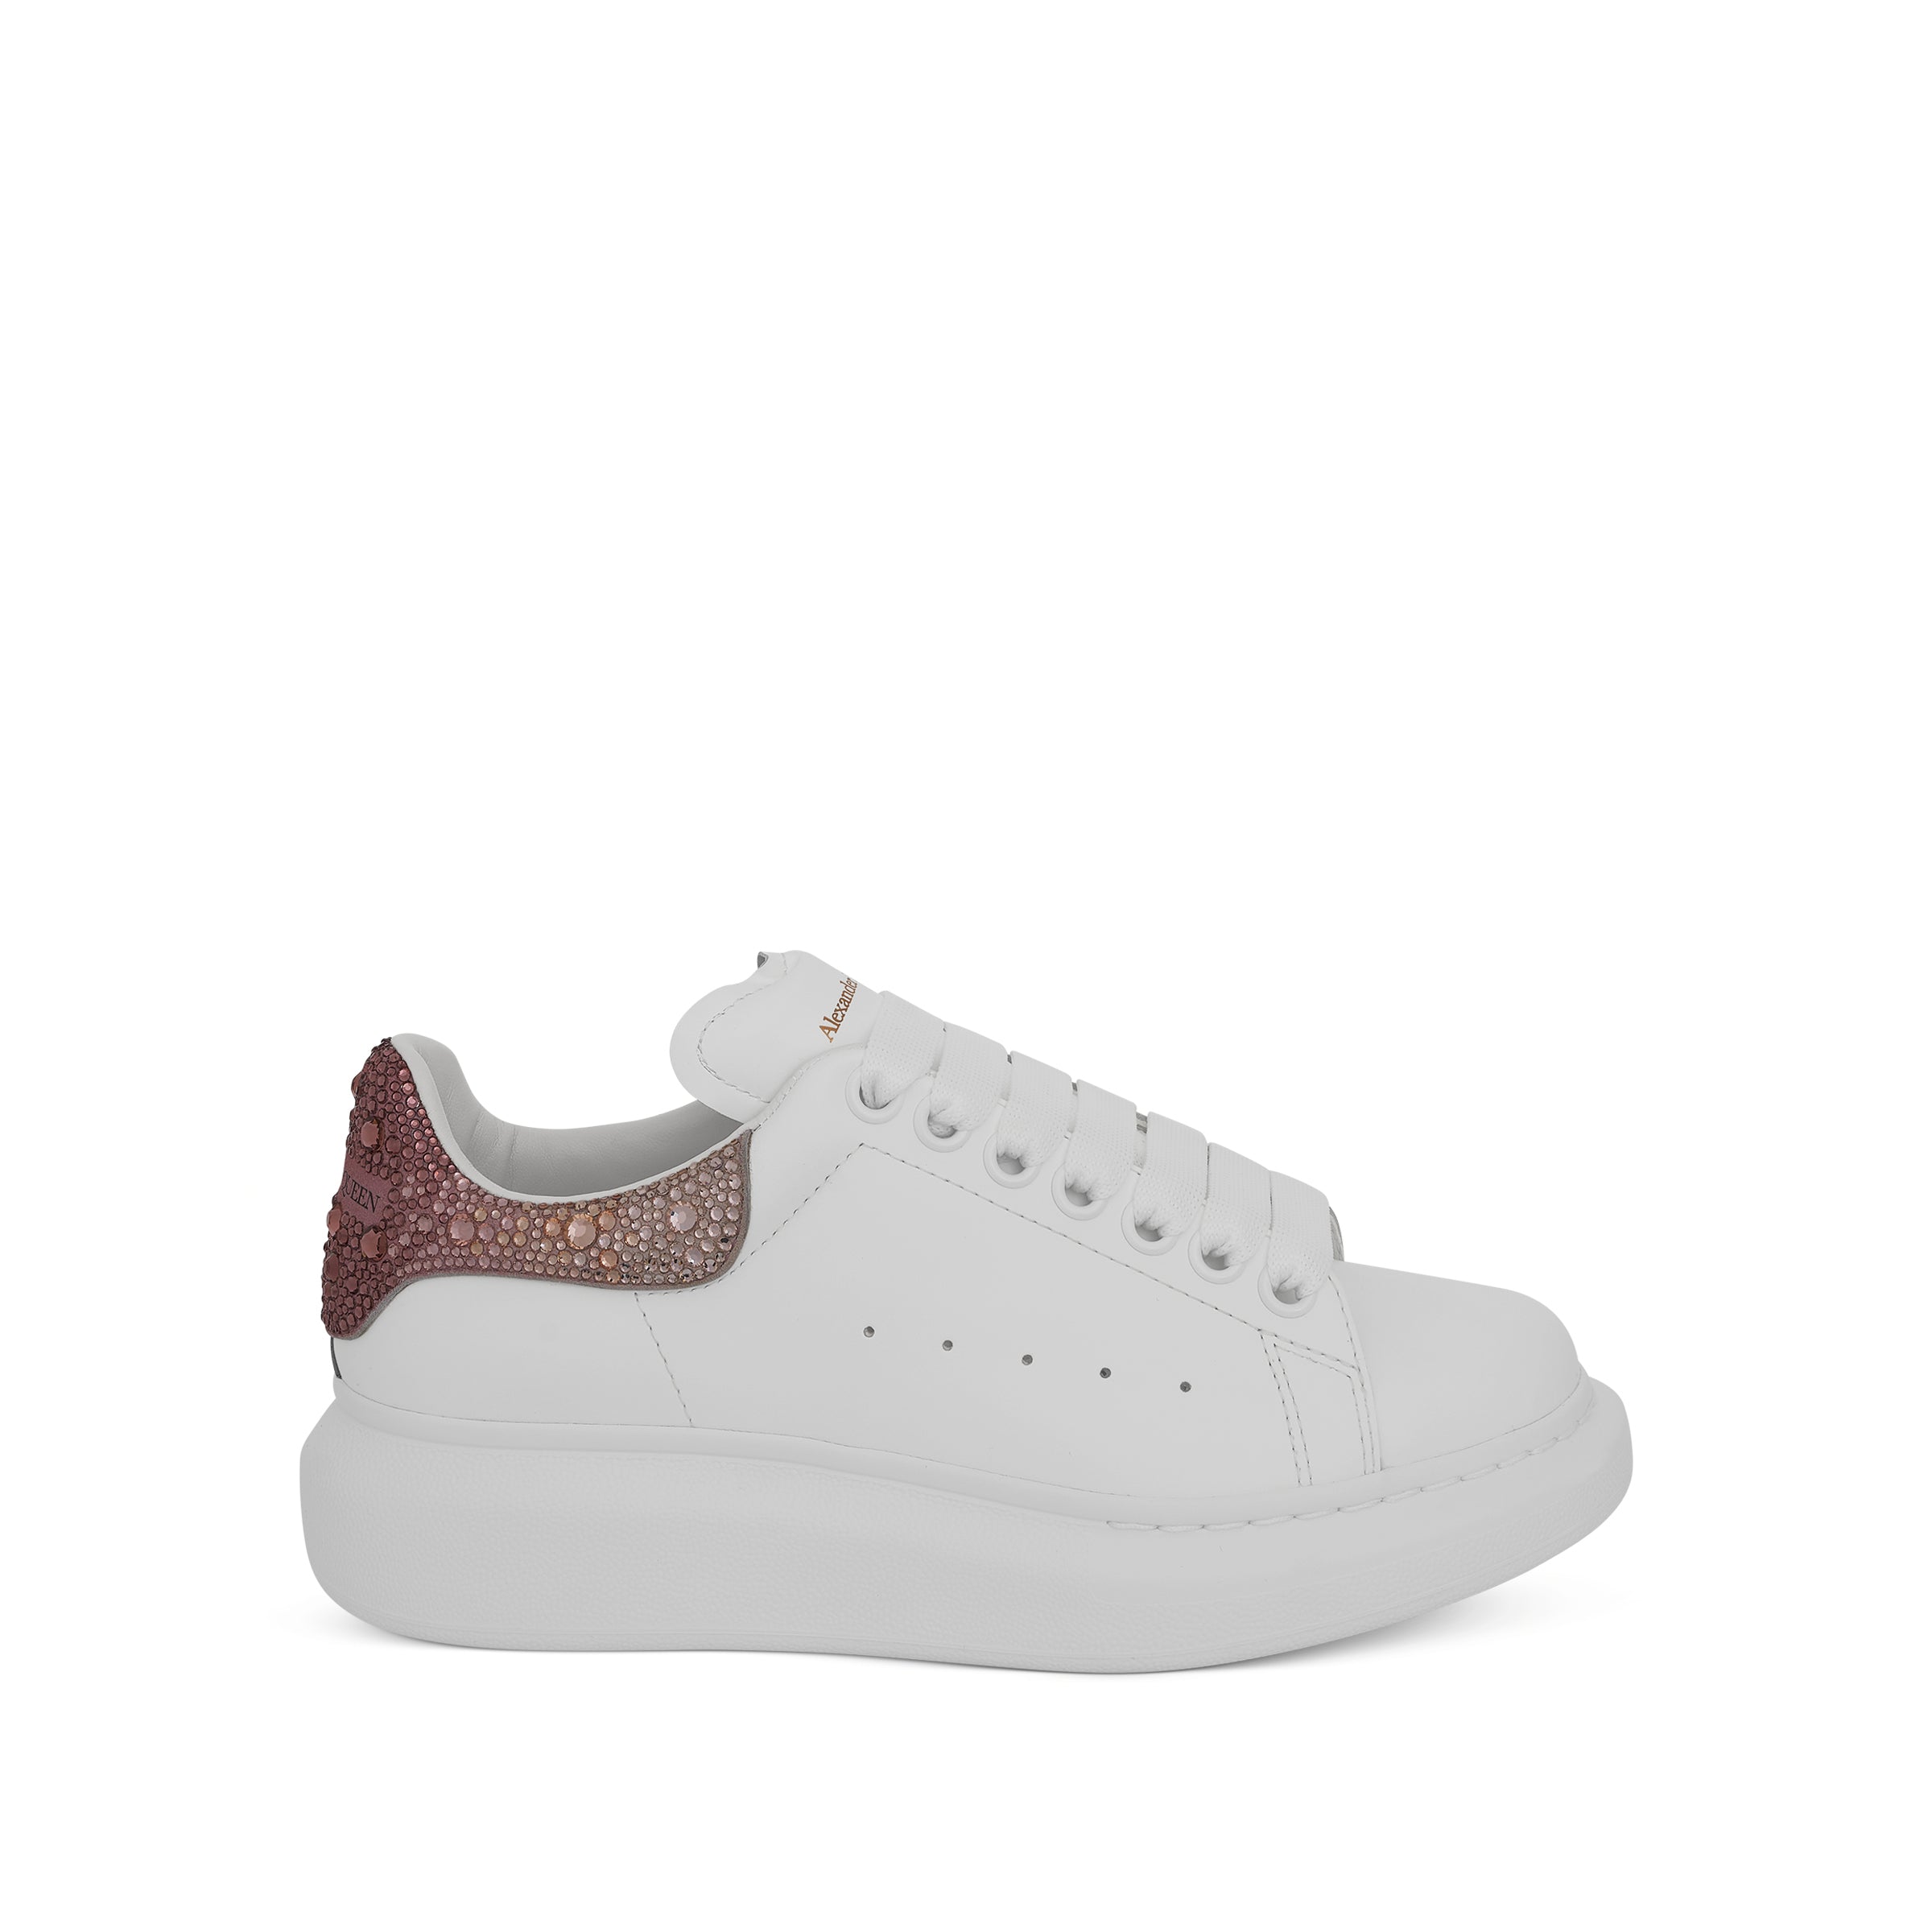 Larry Oversized Degrade Strass Sneakers in White/Pink